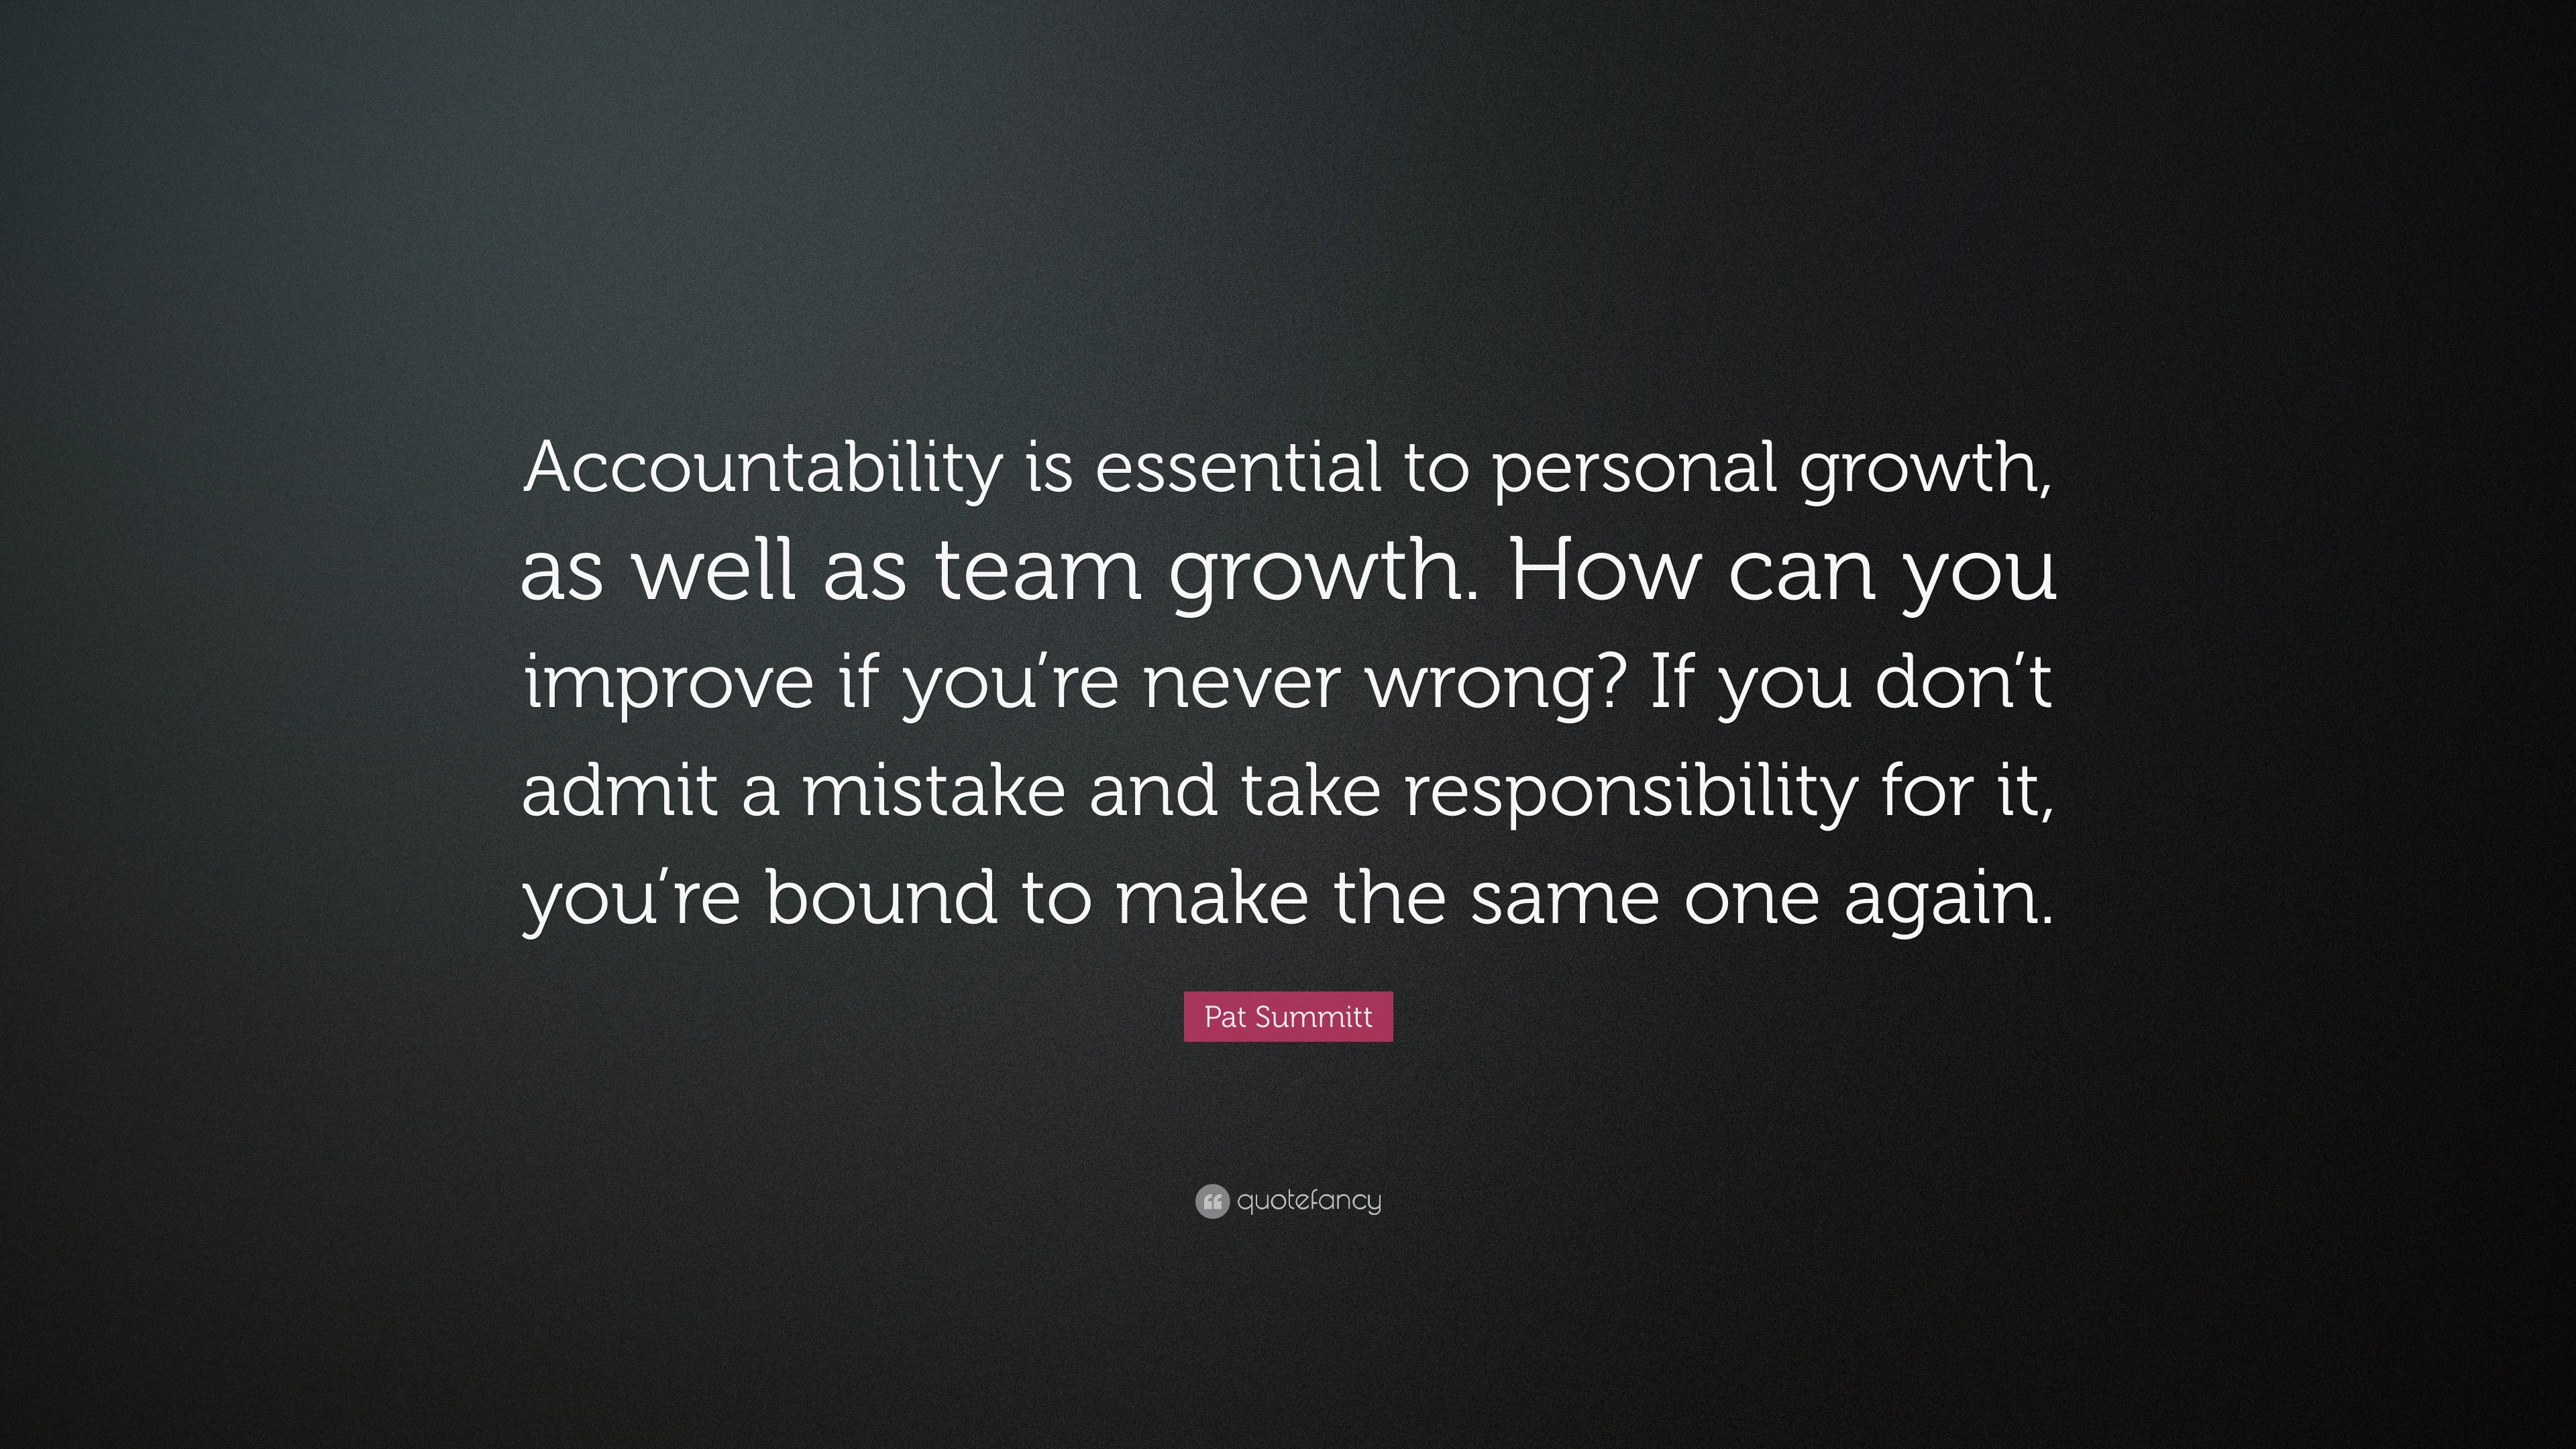 Pat Summitt Quote: “Accountability is essential to personal growth, as